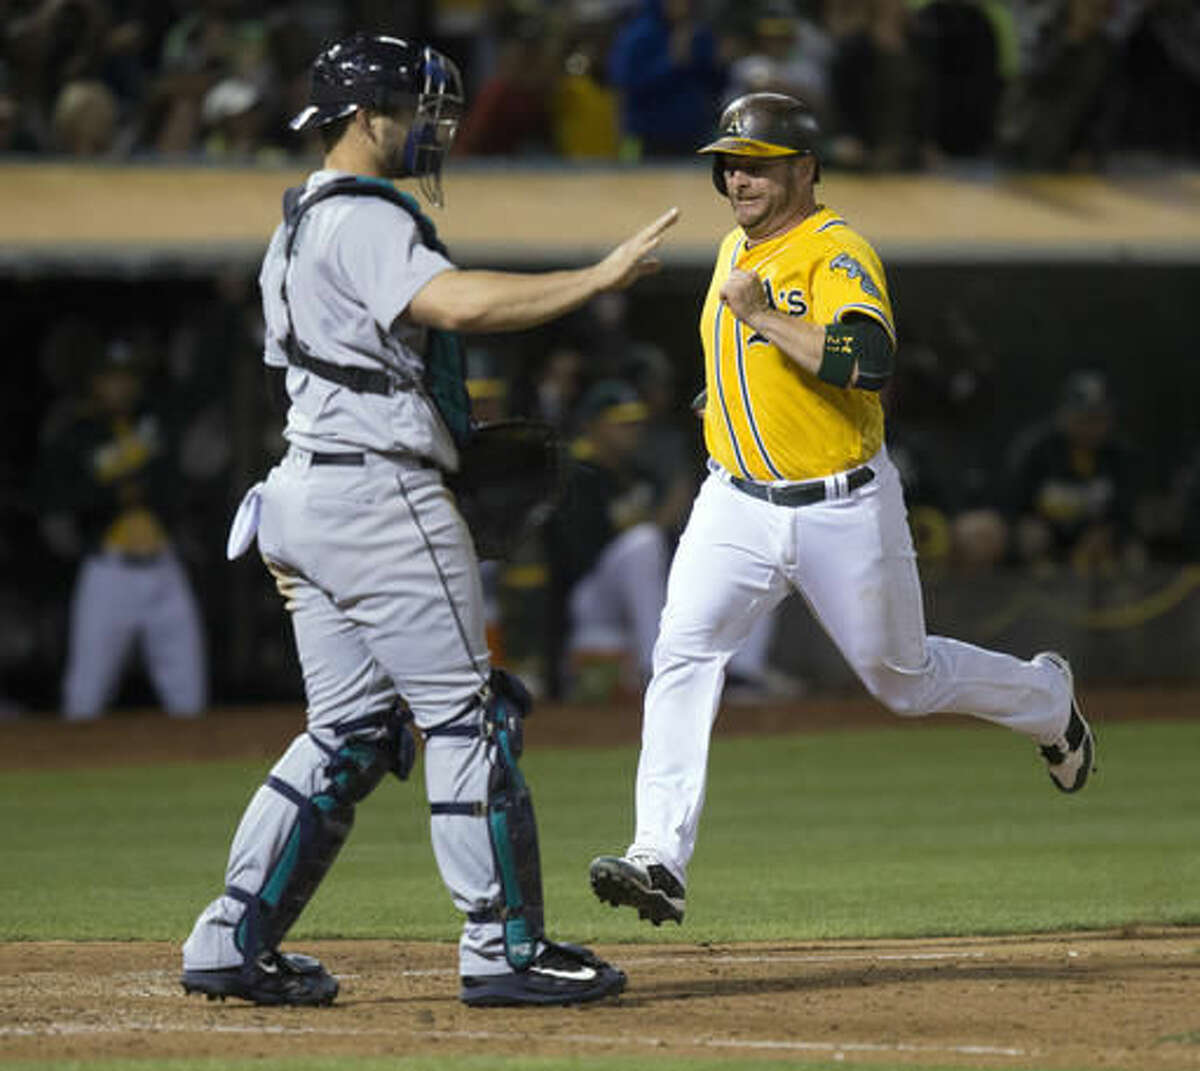 CORRECTS TO SINGLE INSTEAD OF DOUBLE BY YONDER ALONSO - Oakland Athletics' Stephen Vogt scores past Seattle Mariners' Mike Zunino on Yonder Alonso's two-run single during the sixth inning of a baseball game Friday, Aug. 12, 2016, in Oakland, Calif. (AP Photo/D. Ross Cameron)